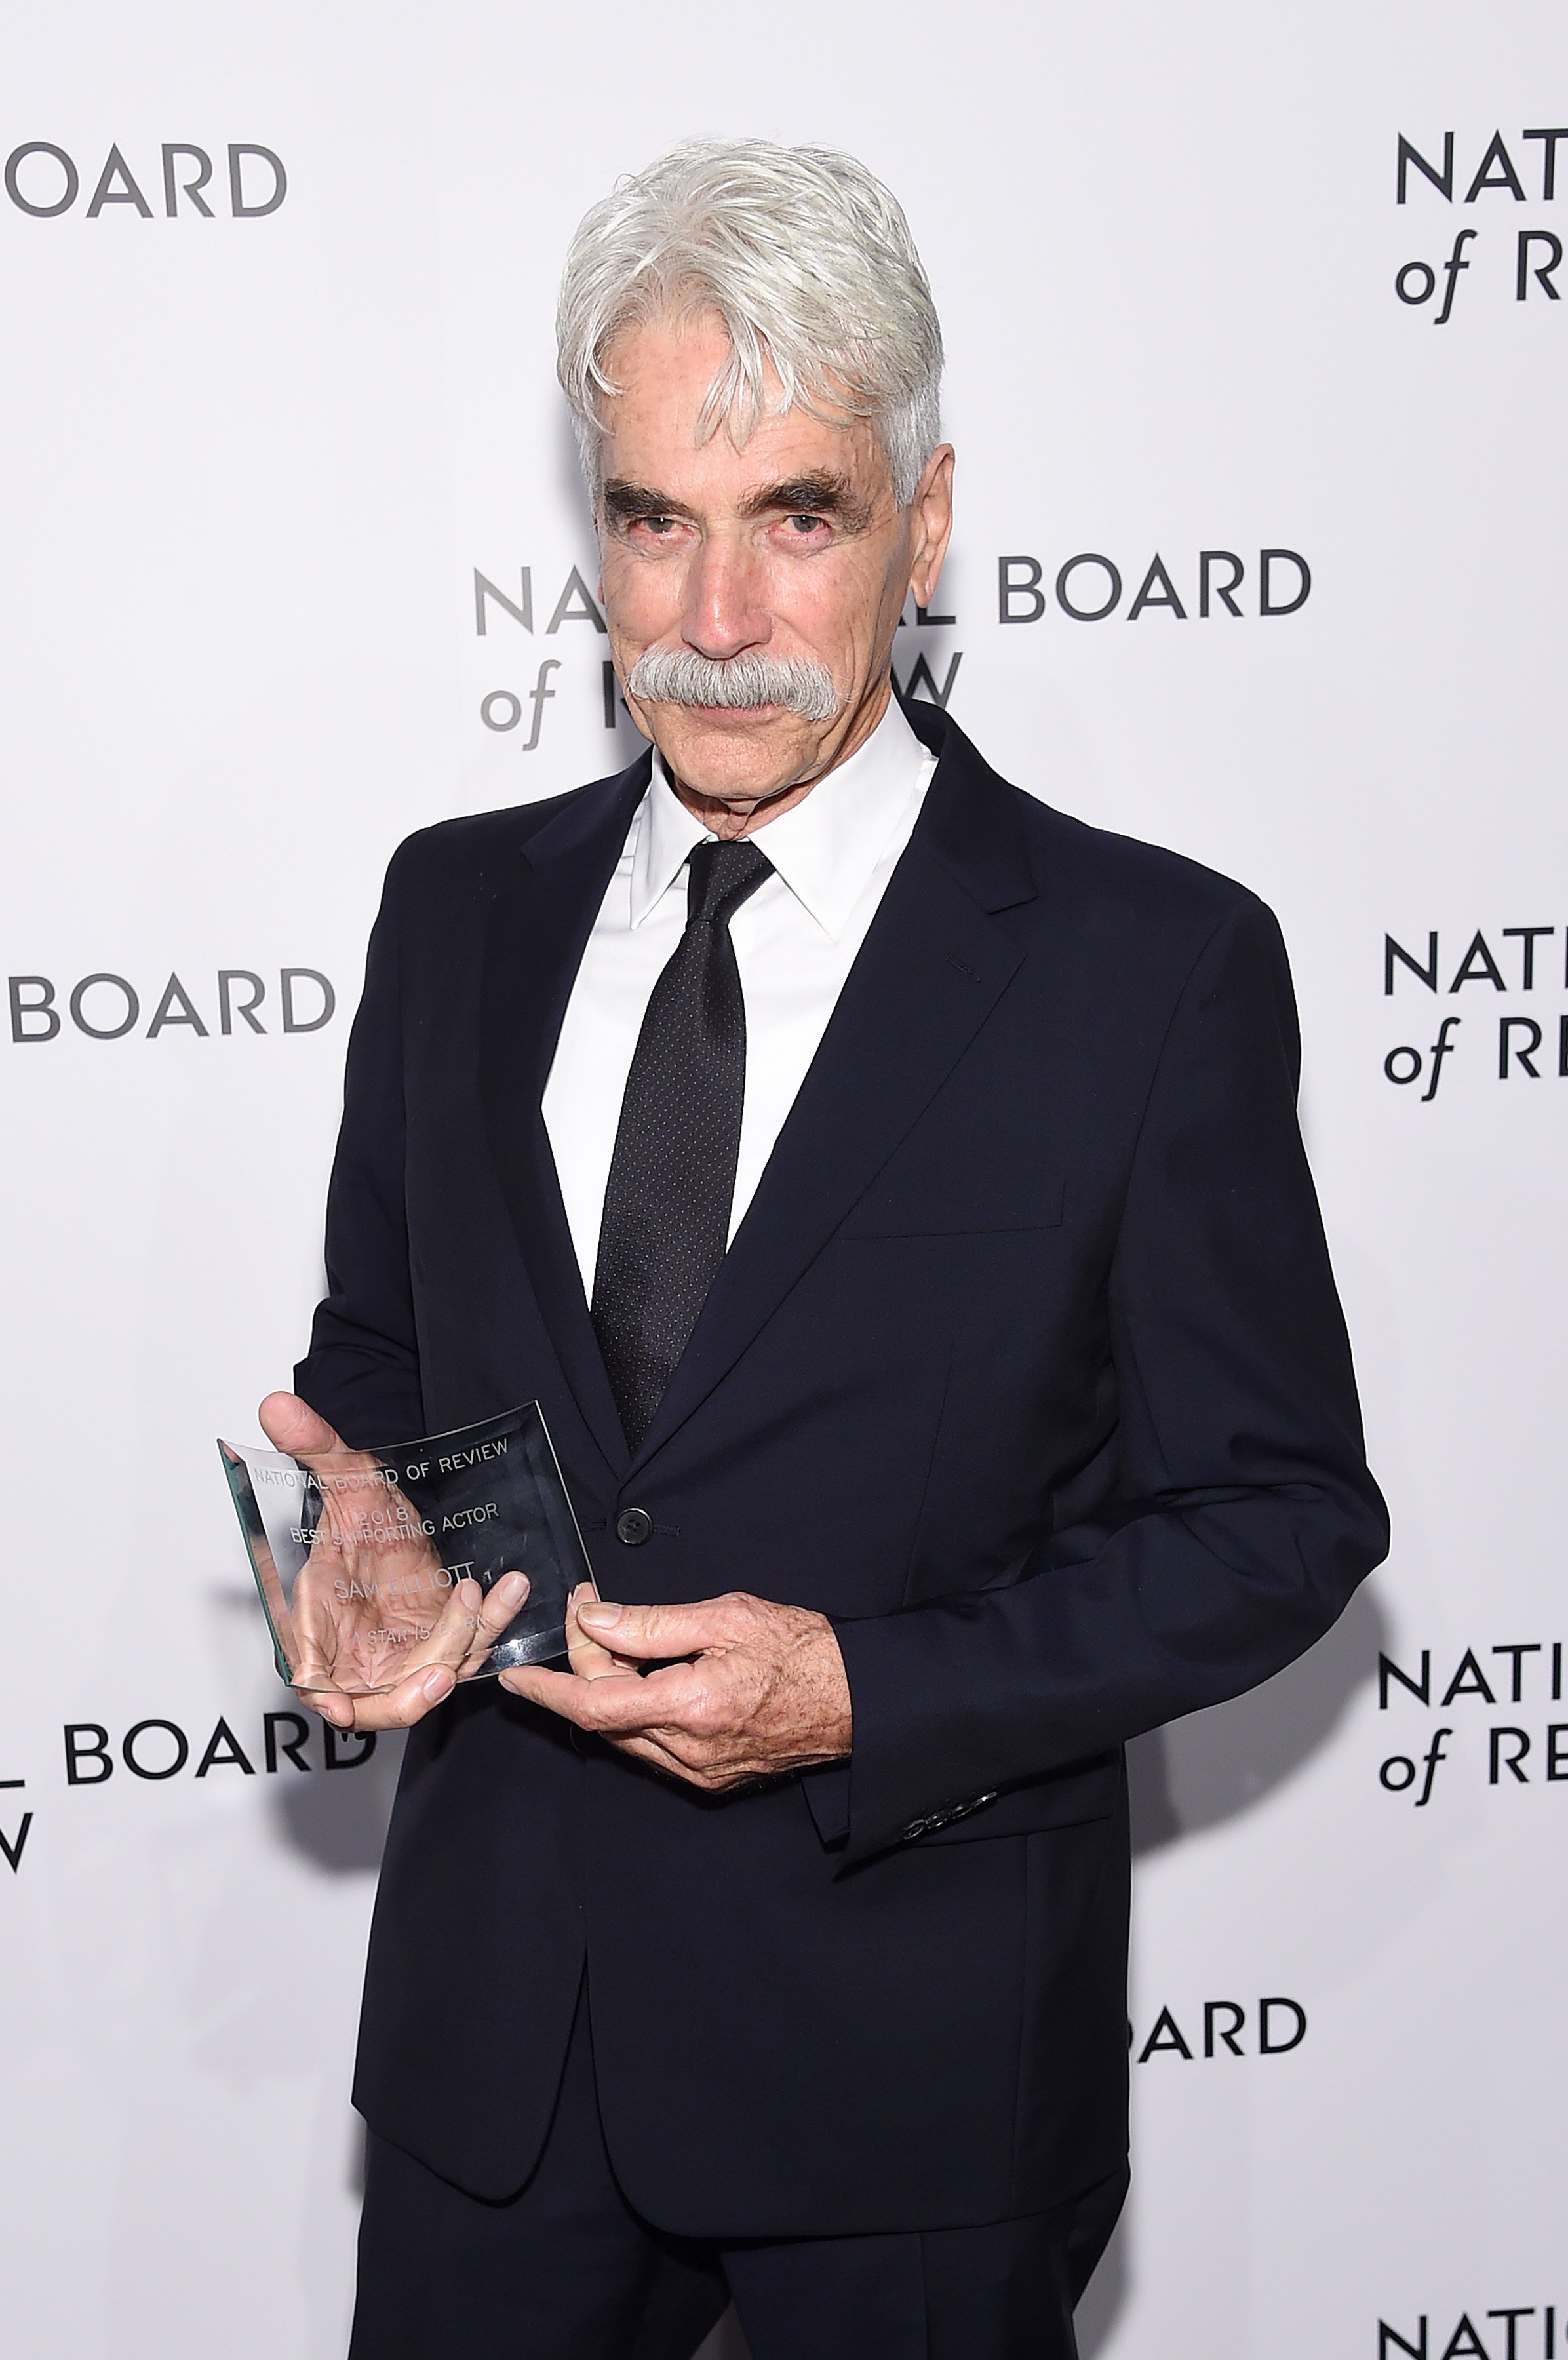 Sam Elliot poses backstage with the Best Supporting Actor award for A Star Is Born during The National Board of Review Annual Awards Gala at Cipriani 42nd Street on January 8, 2019 in New York City. | Source: Getty Images